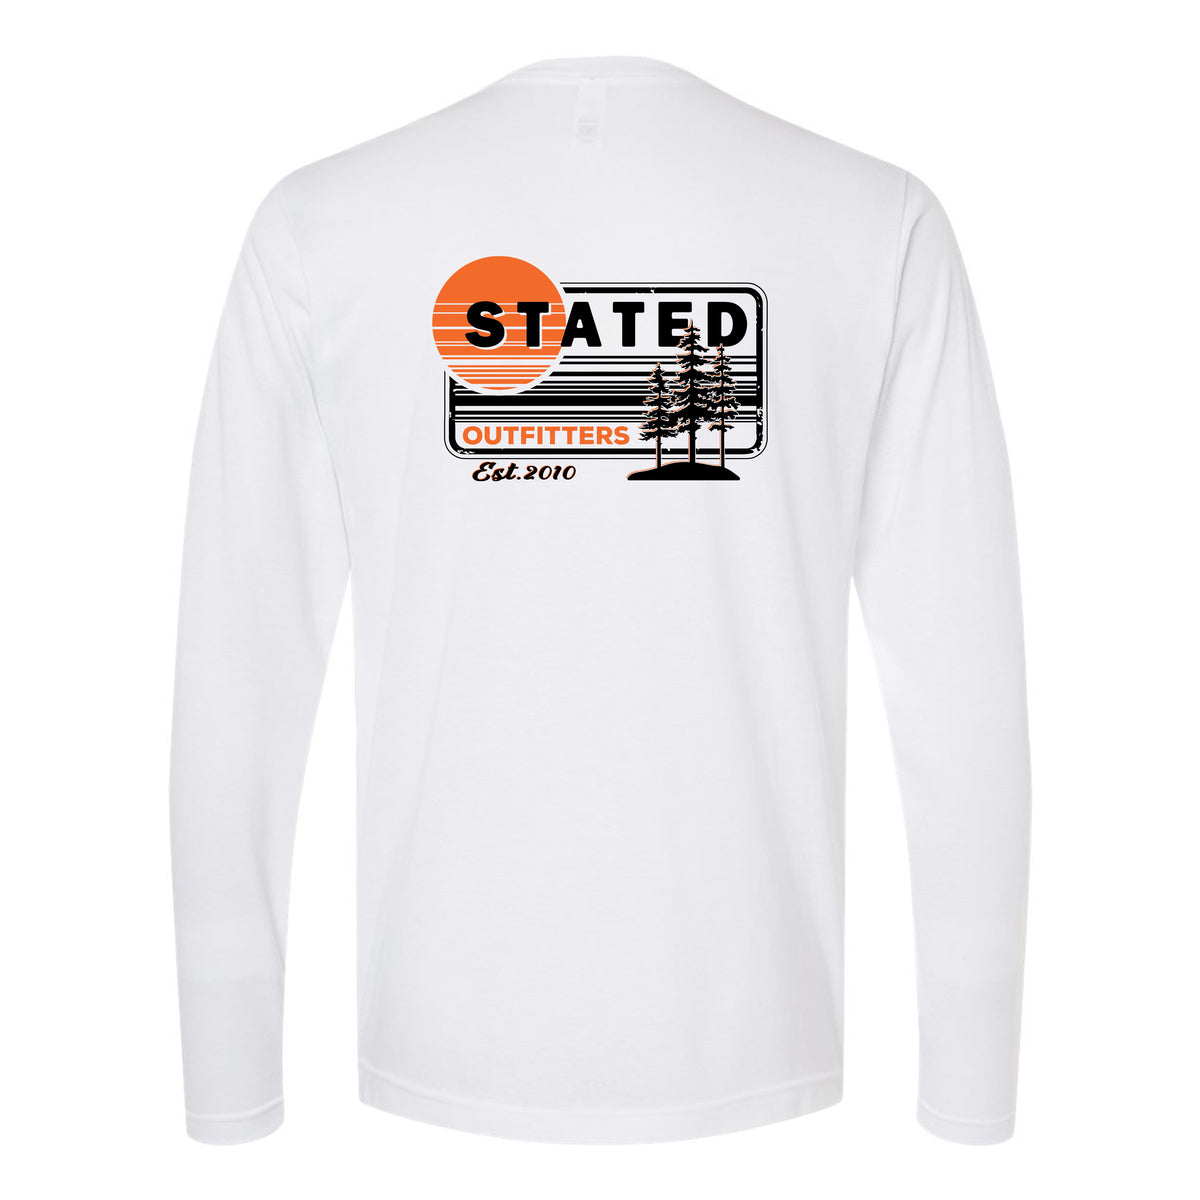 Stated Outfitters License Plate Long Sleeve Shirt